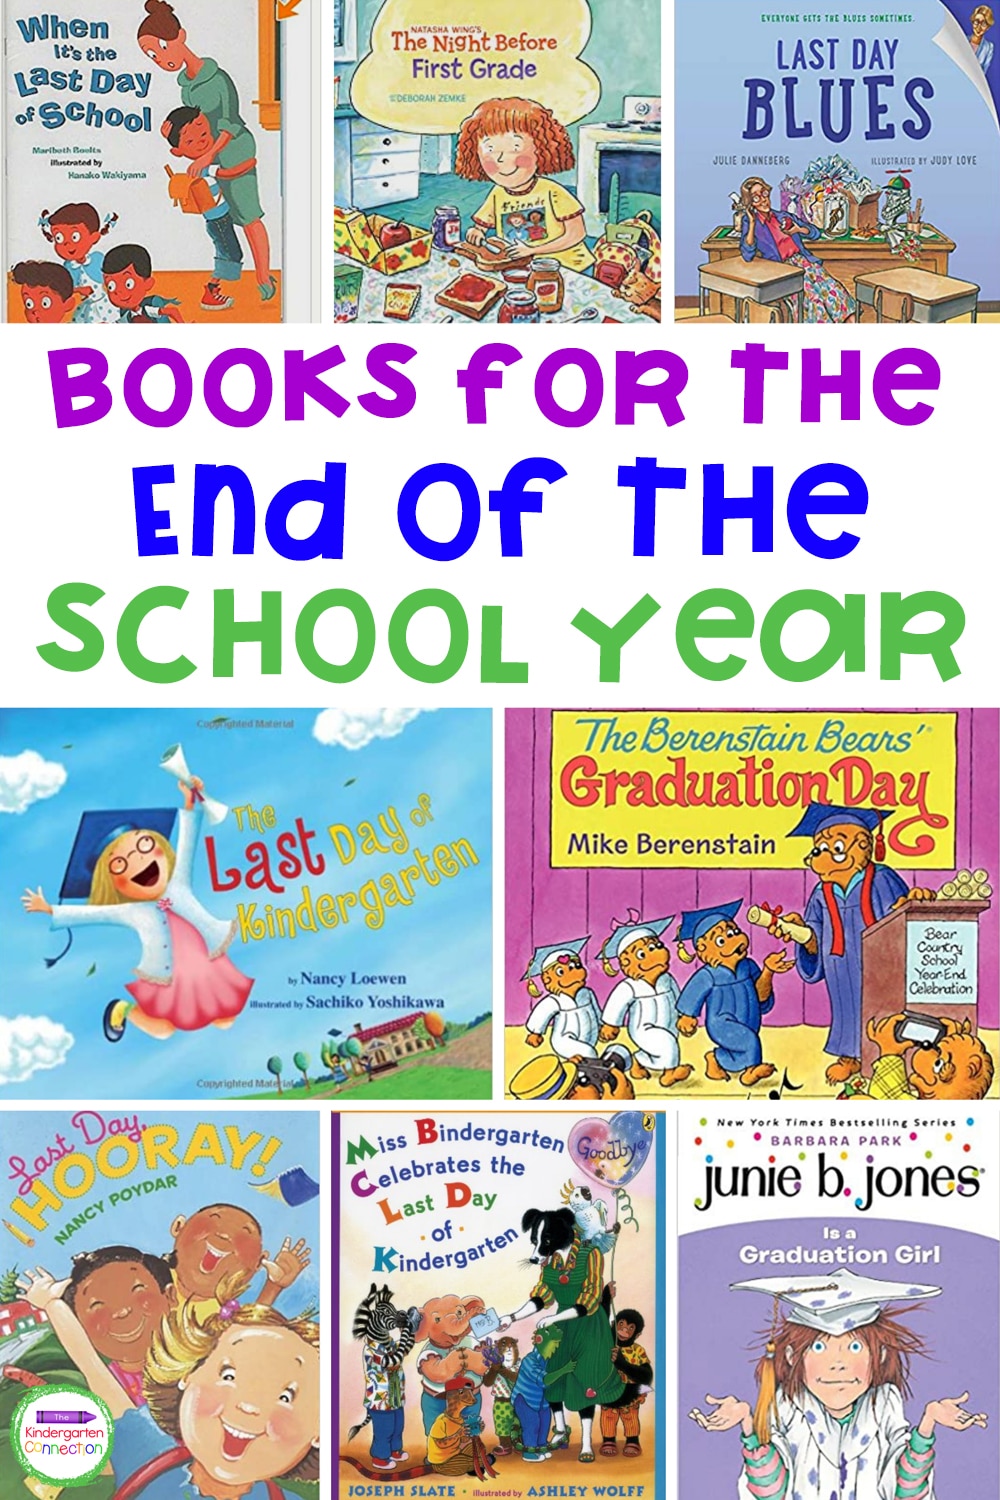 With the excitement of summer quickly approaching, these books for the end of the school year will help keep your students engaged!